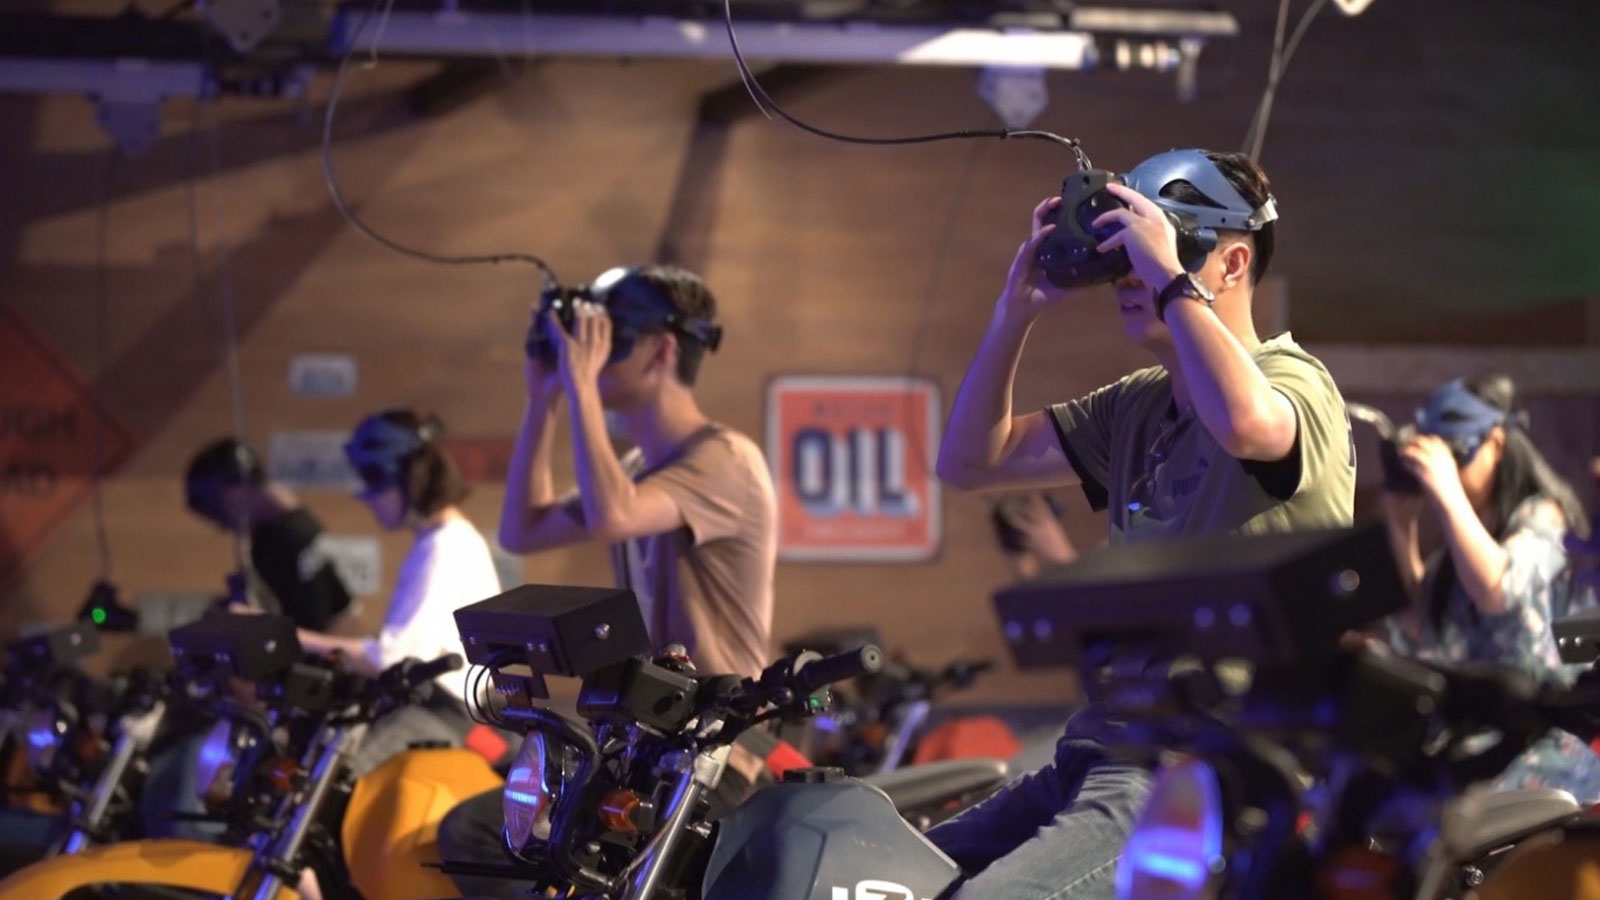 People on motorcylces with VR headsets with Ultraleap tracking technology